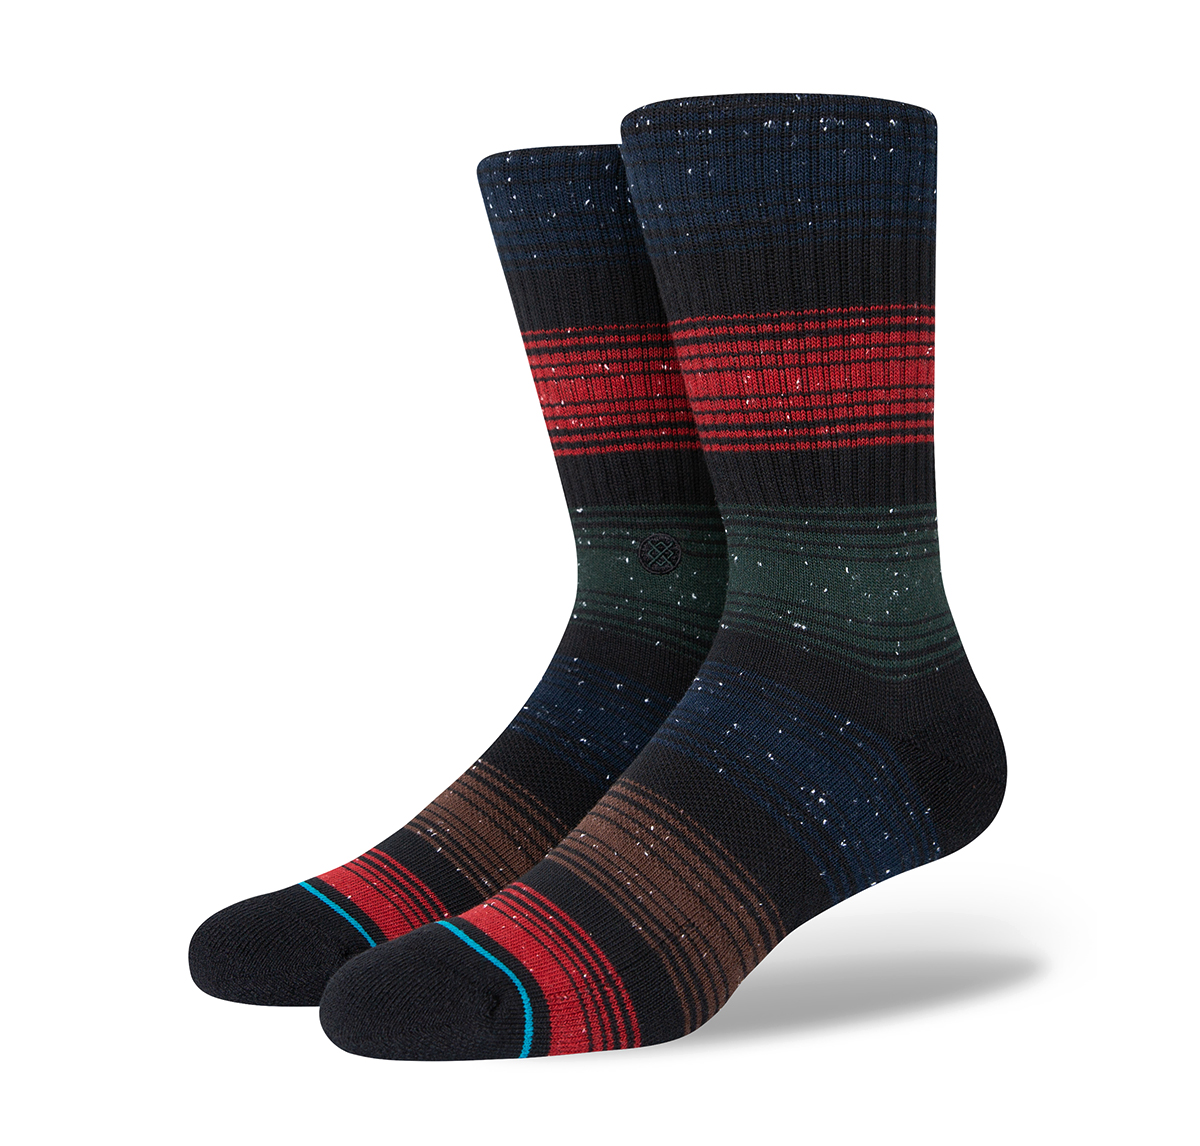 Stance Subnivean - Infiknit - Black side